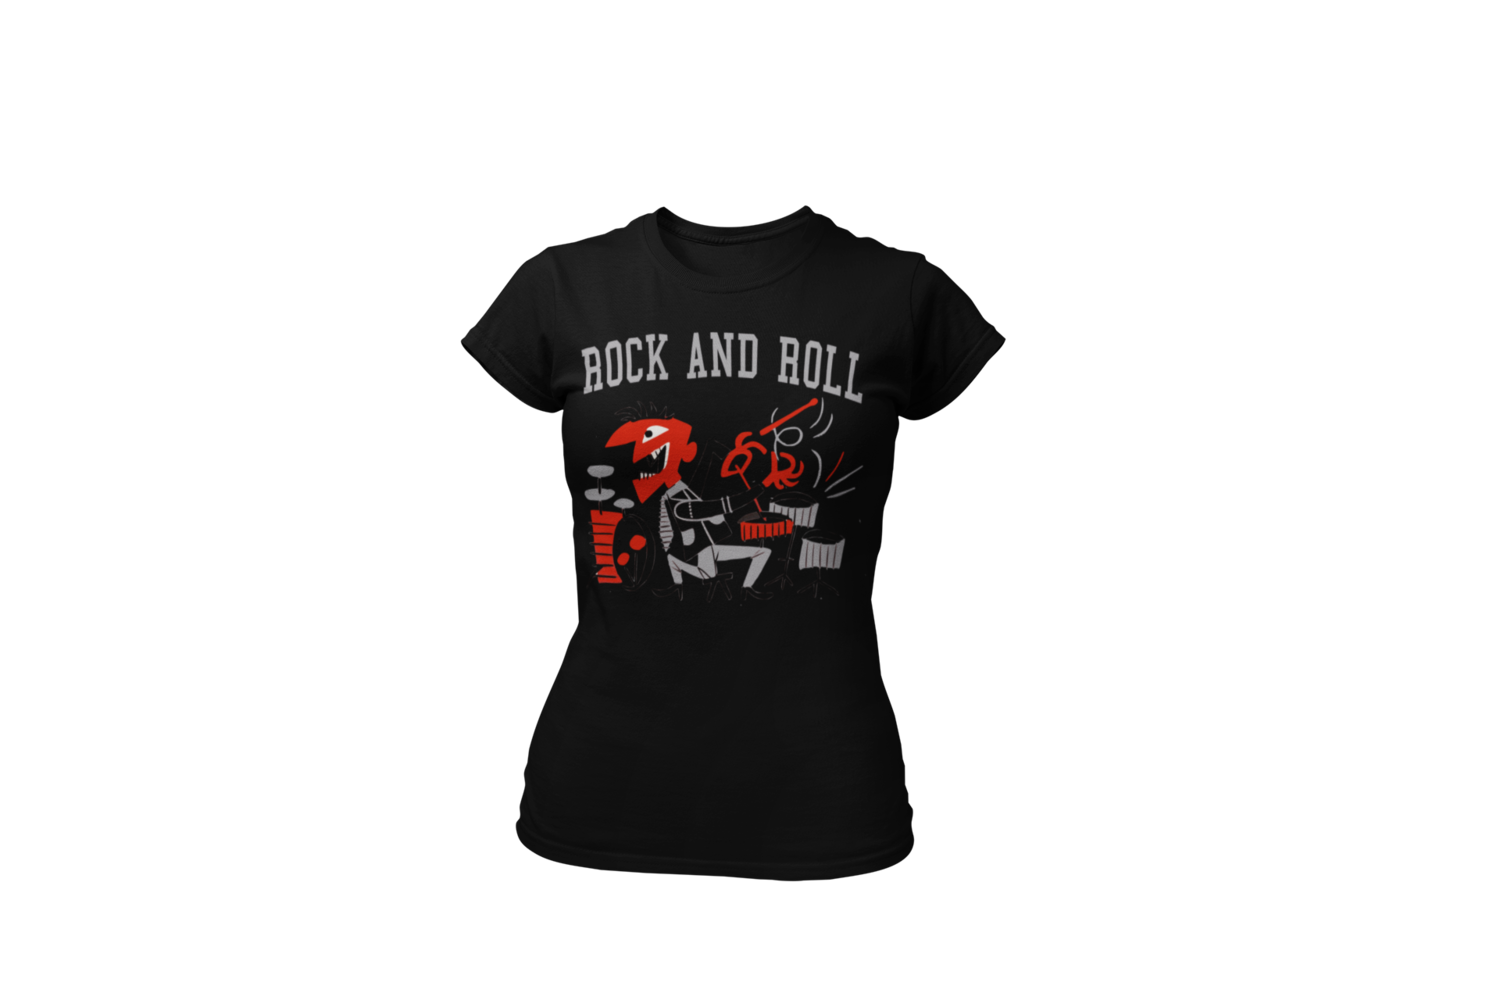 ROCK AND ROLL DRUMMER T-SHIRT WOMAN